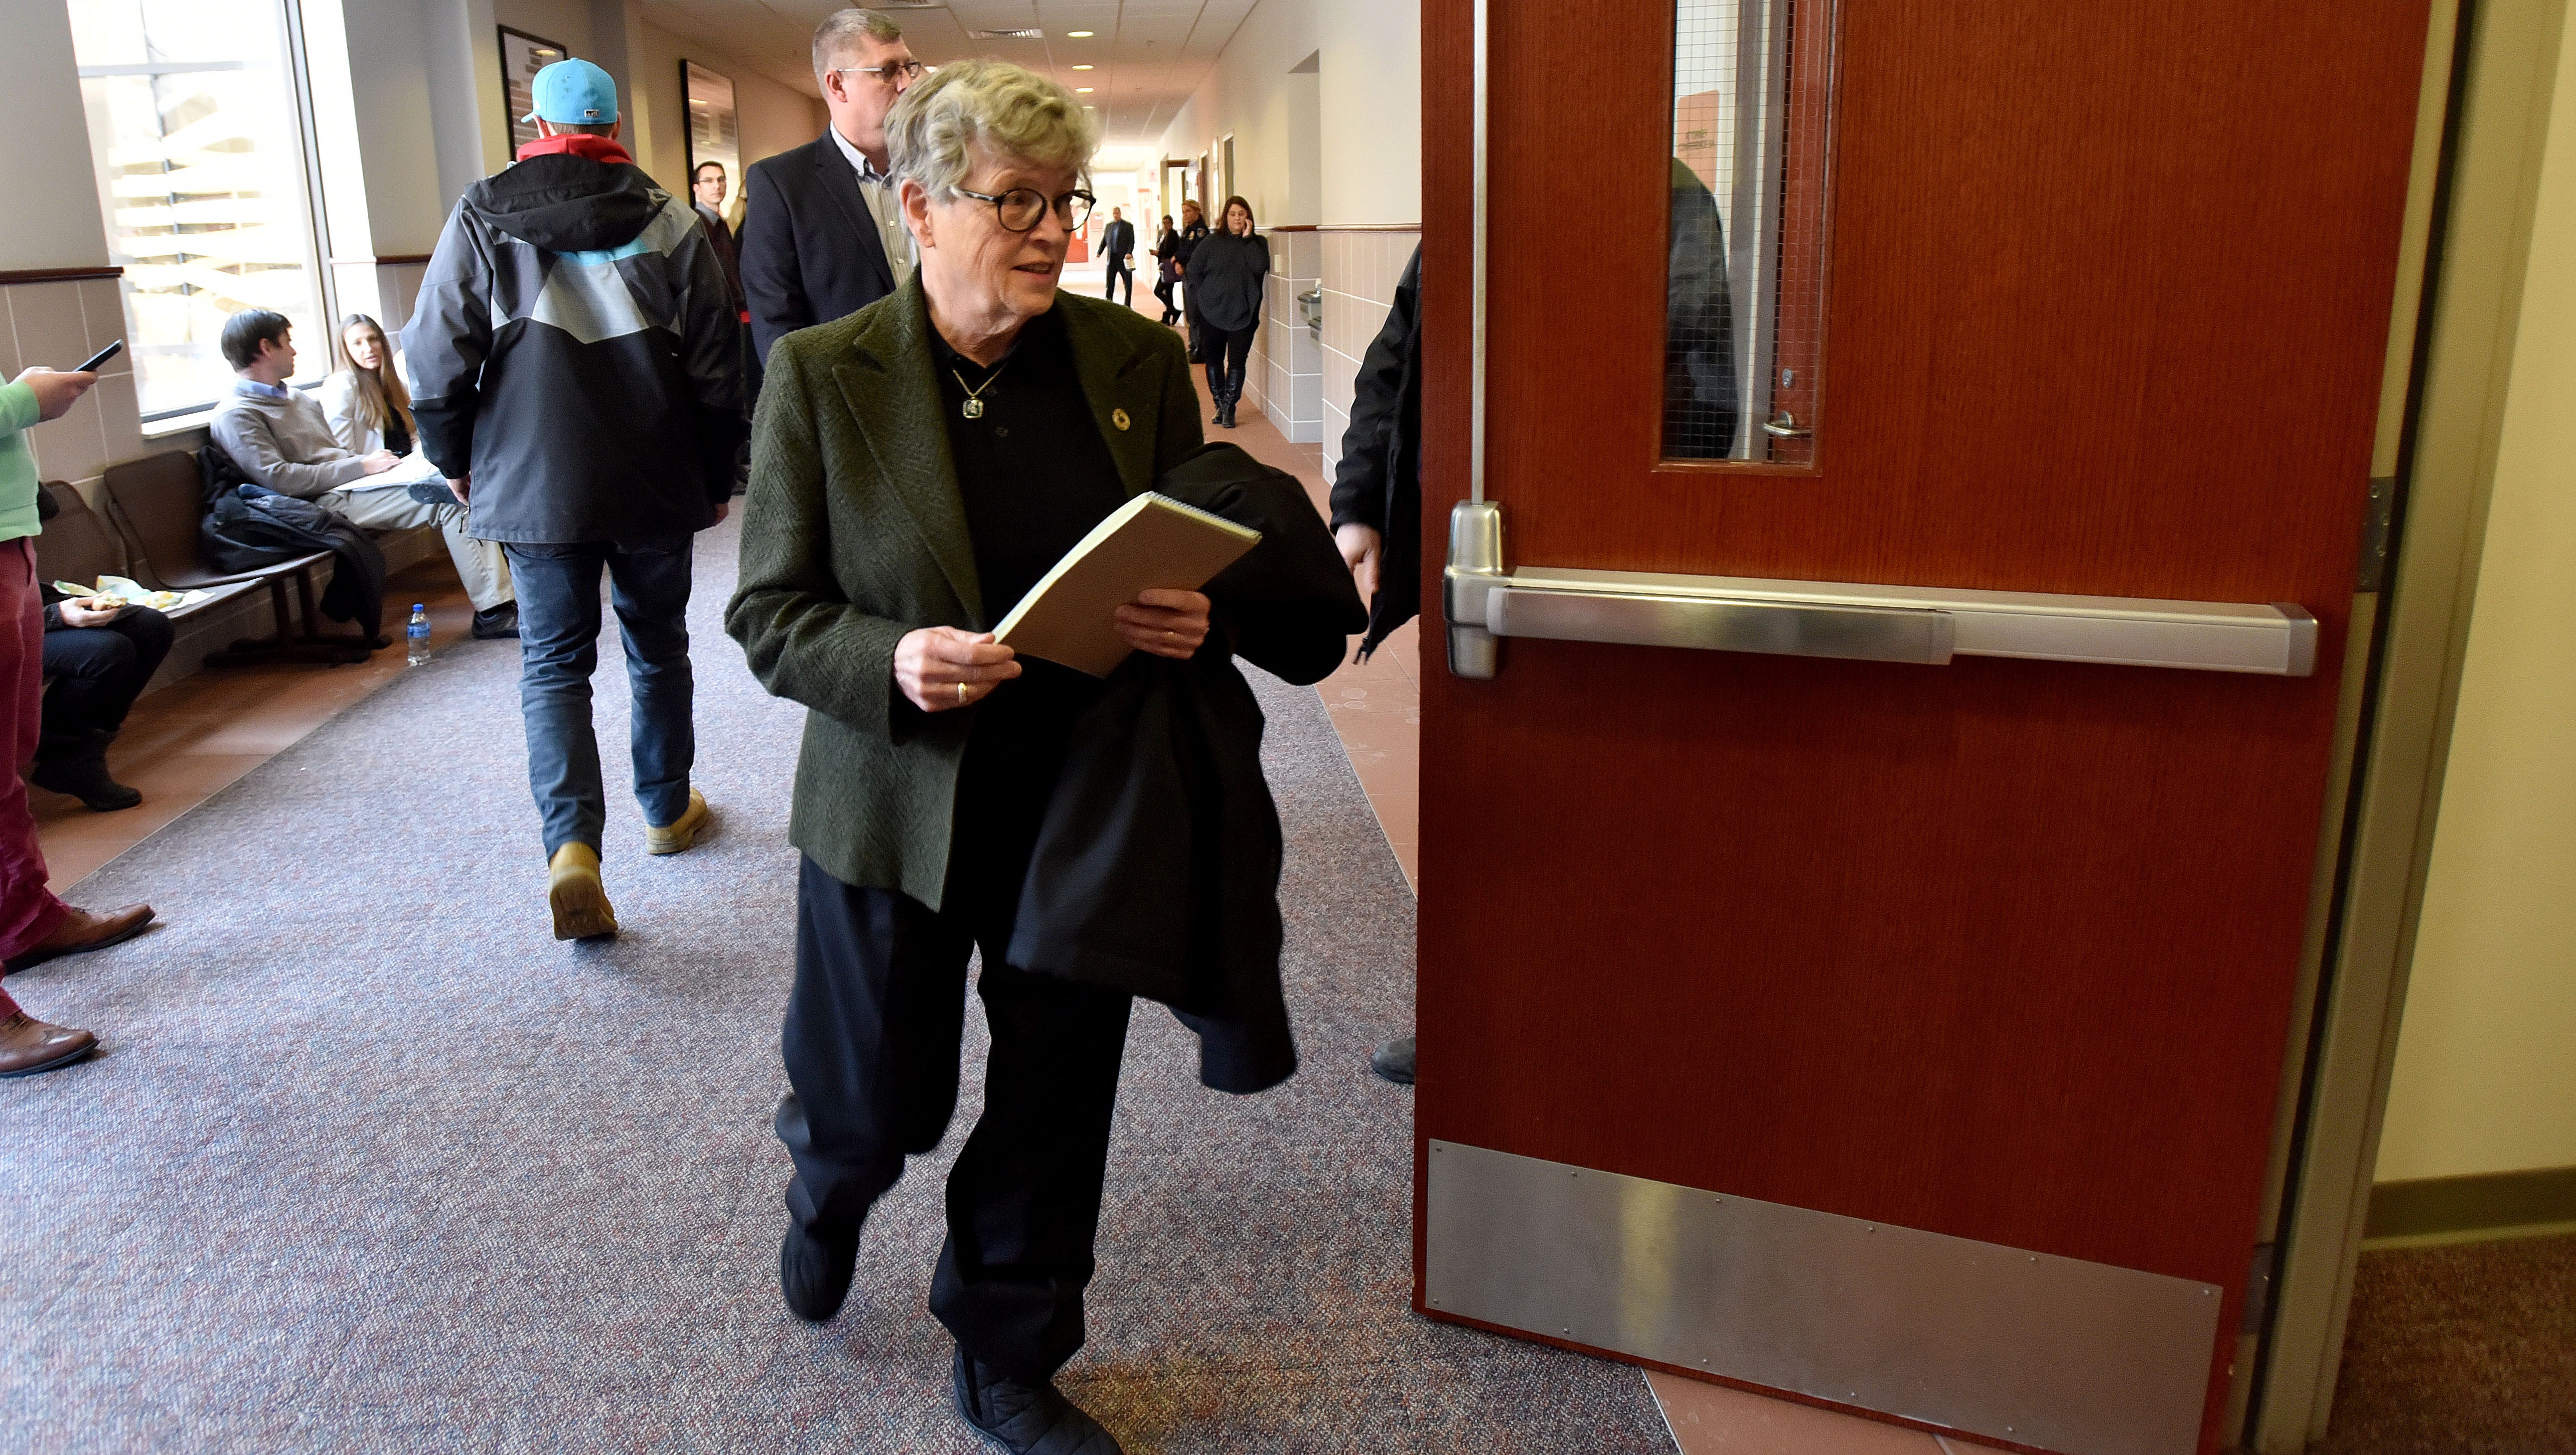 2014: MSU President Lou Anna Simon is informed that a Title IX complaint and a police report had been filed against an unnamed physician. "I told people to play it straight up, and I did not receive a copy of the report. That's the truth," she said January 17, 2018, in Lansing.